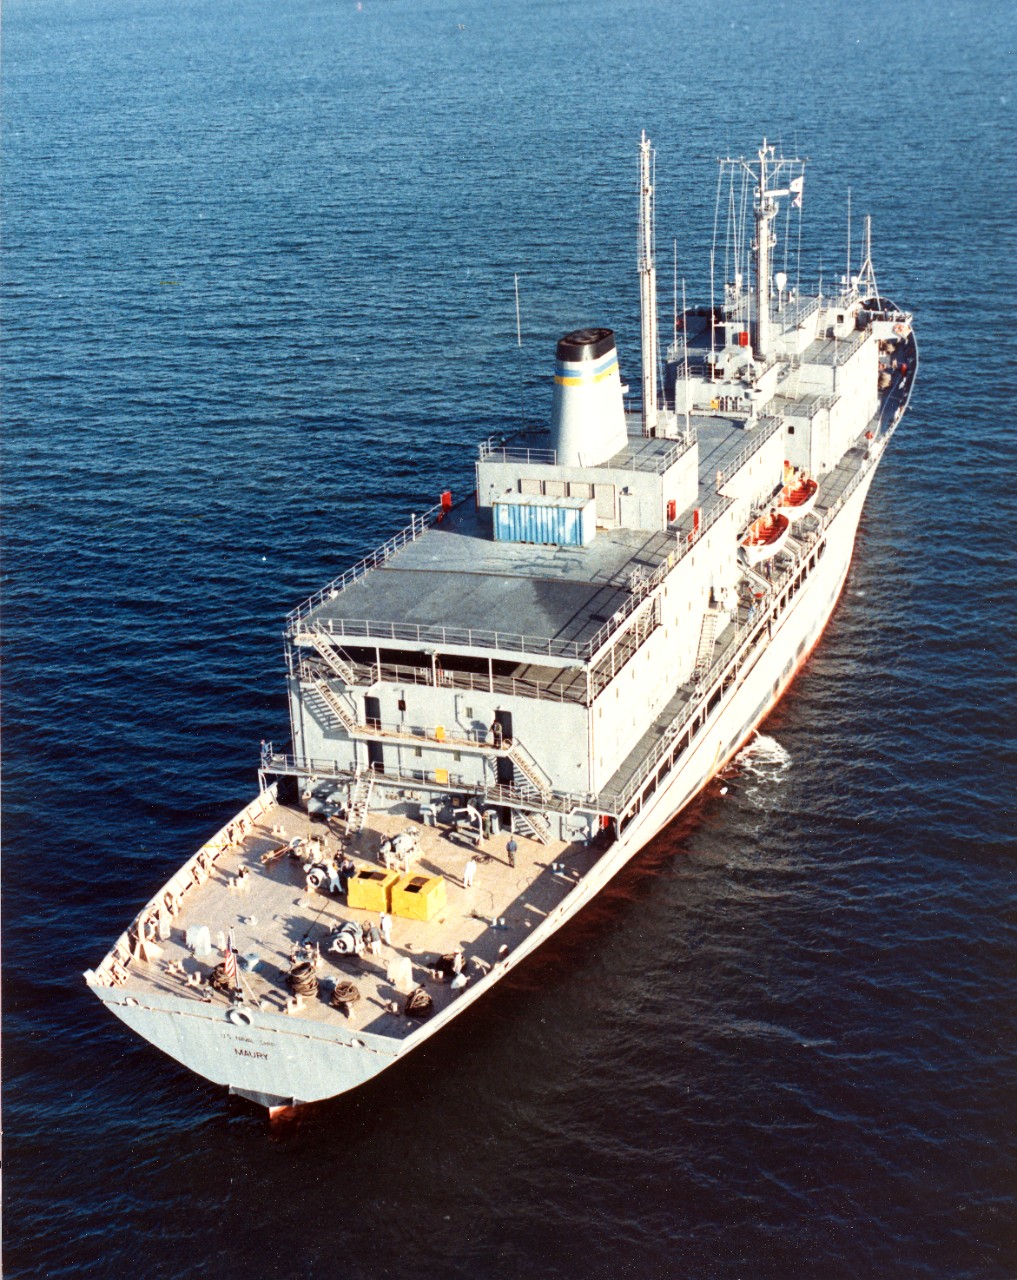 <p>Collection of 52 images related to ships operated by the Military Sealift Command, including: USNS Waters (T-AGS-45), USNS Hayes (T-AGOR-16), USNS Range Sentinel (T-AGM-22), USNS Redstone (T-AGM-20), USNS Vanguard (T-AG-194), USNS Maury (T-AGS-66), USNS Bowditch (T-AGS-62), USNS Furman (T-AK-280), USNS H.H. Hess(T-AGS-38), USNS Neptune (ARC-2), USNS Albert J. Myer (ARC-6), MV Dolores Chouest, and DSVSS Laney Chouest.</p>
